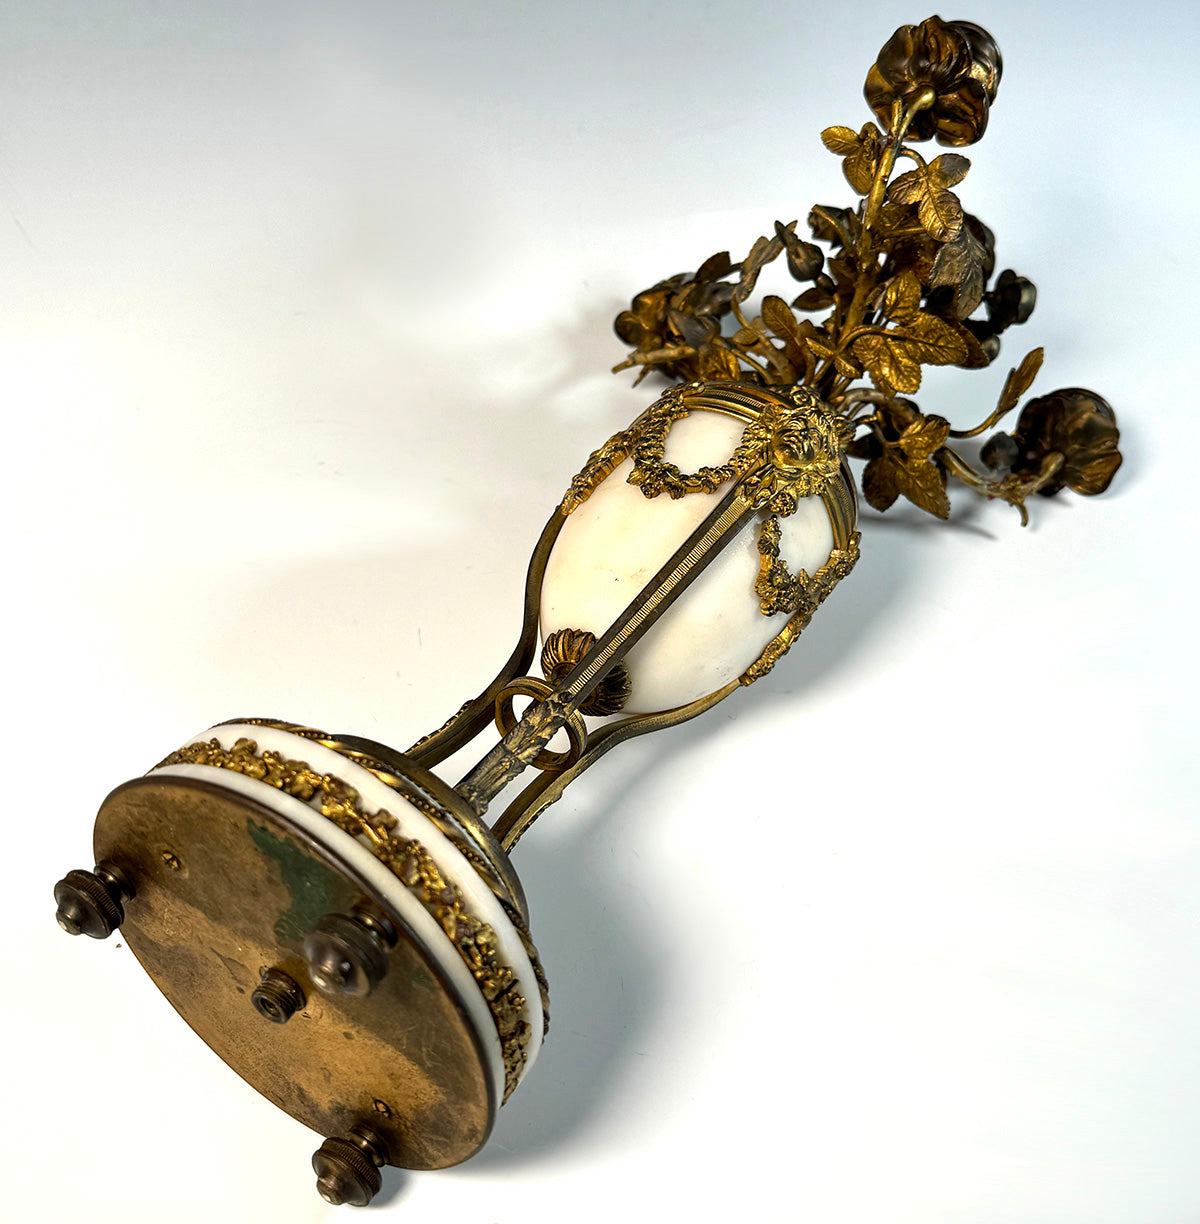 Fabulous Antique French 4-Branch Candelabra Candelabrum, Candle Holder Centerpiece, Neoclassical